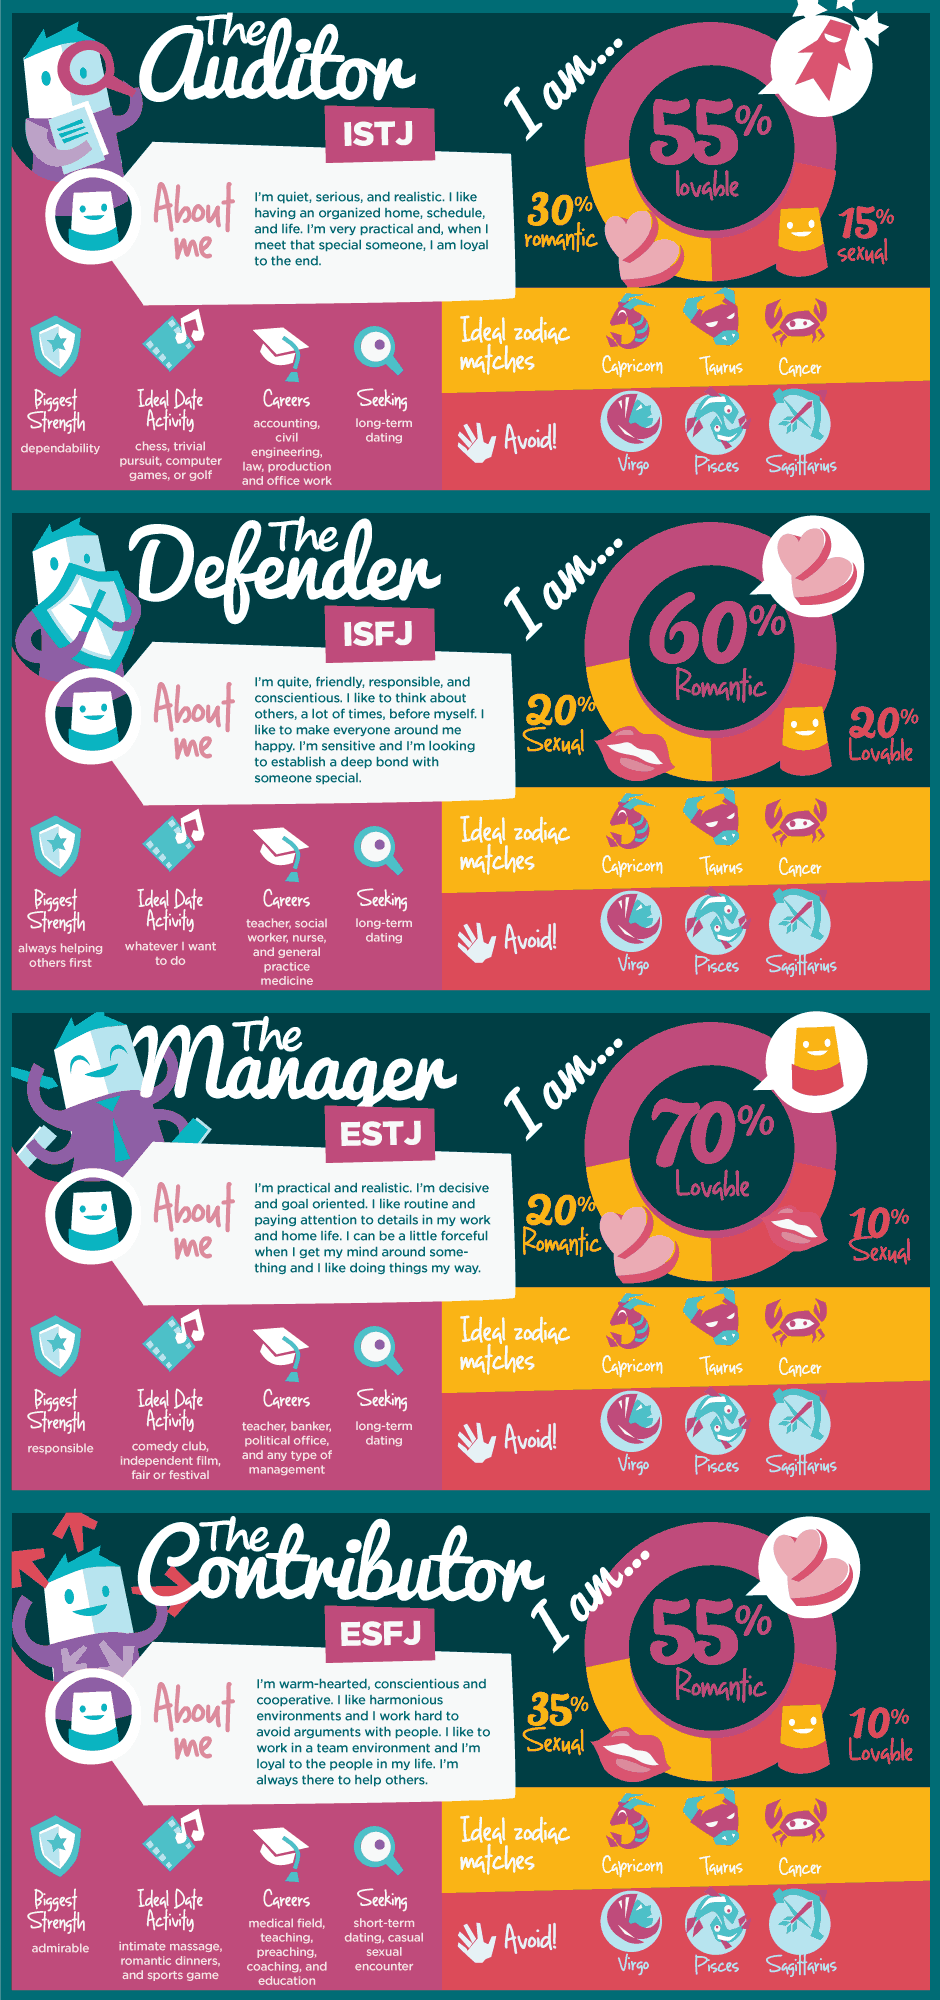 mbti dating infographic - part 2